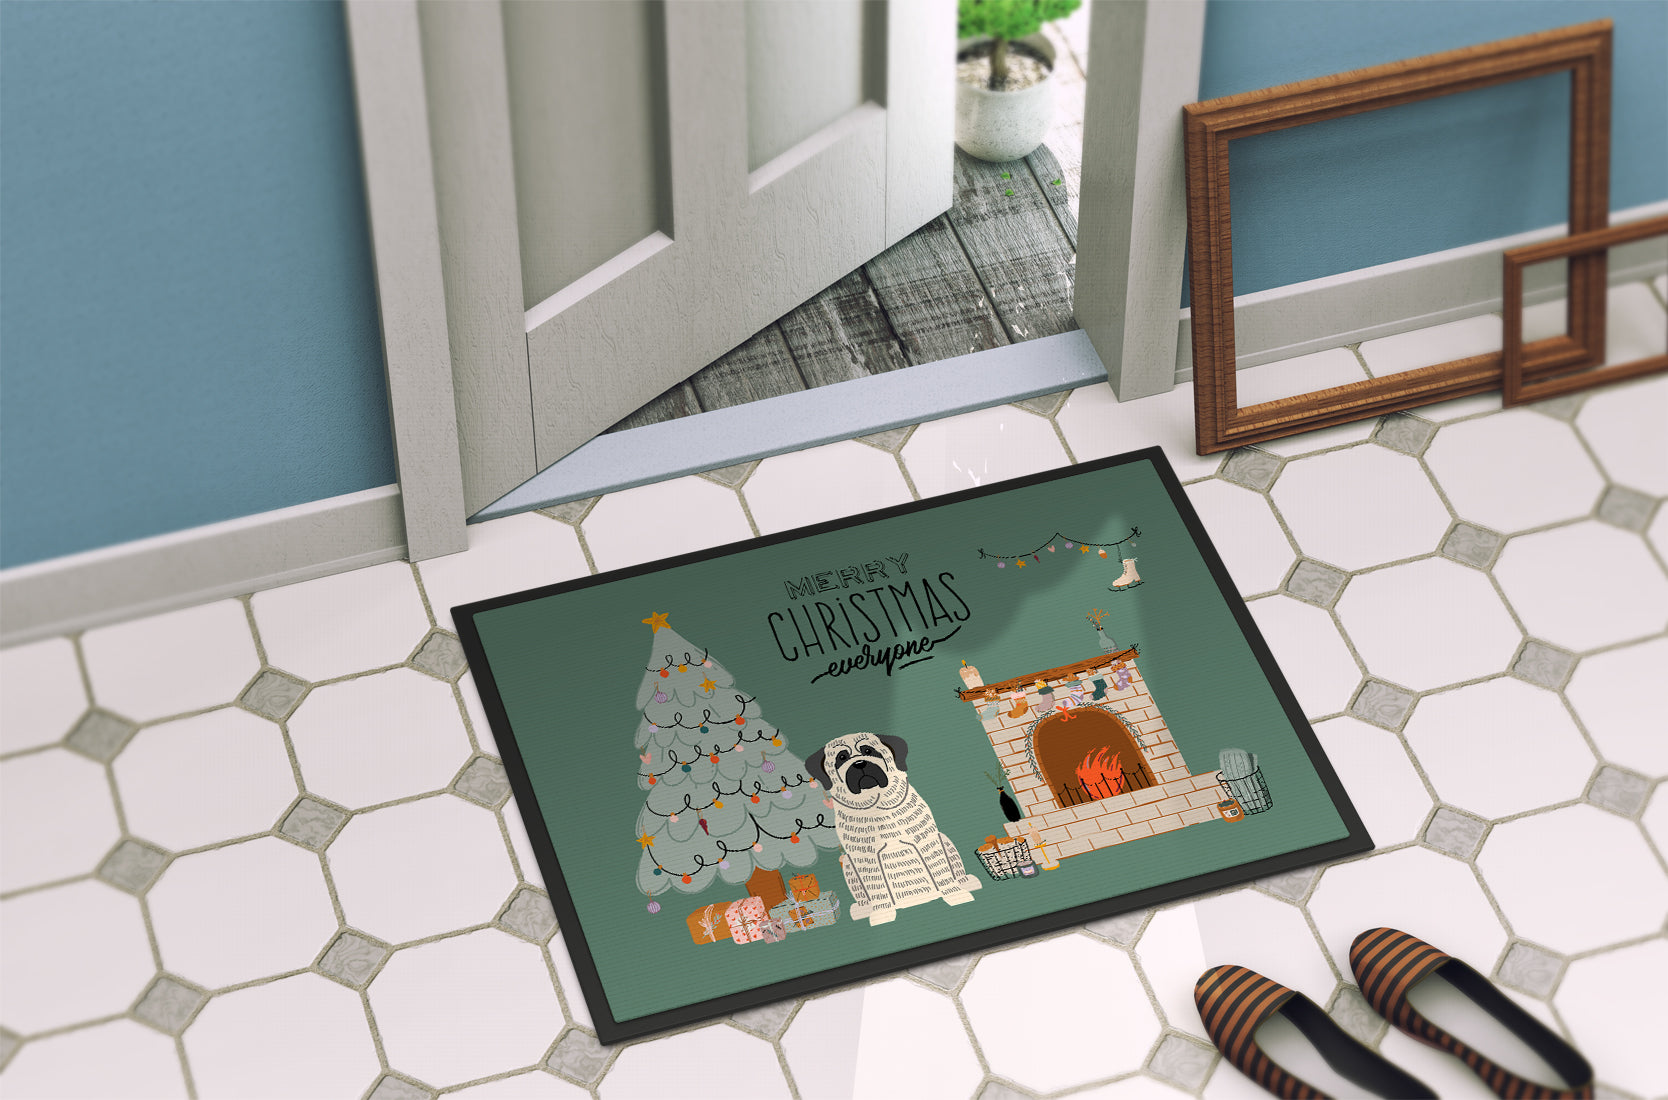 White Mastiff Brindle Christmas Everyone Indoor or Outdoor Mat 18x27 CK7579MAT - the-store.com